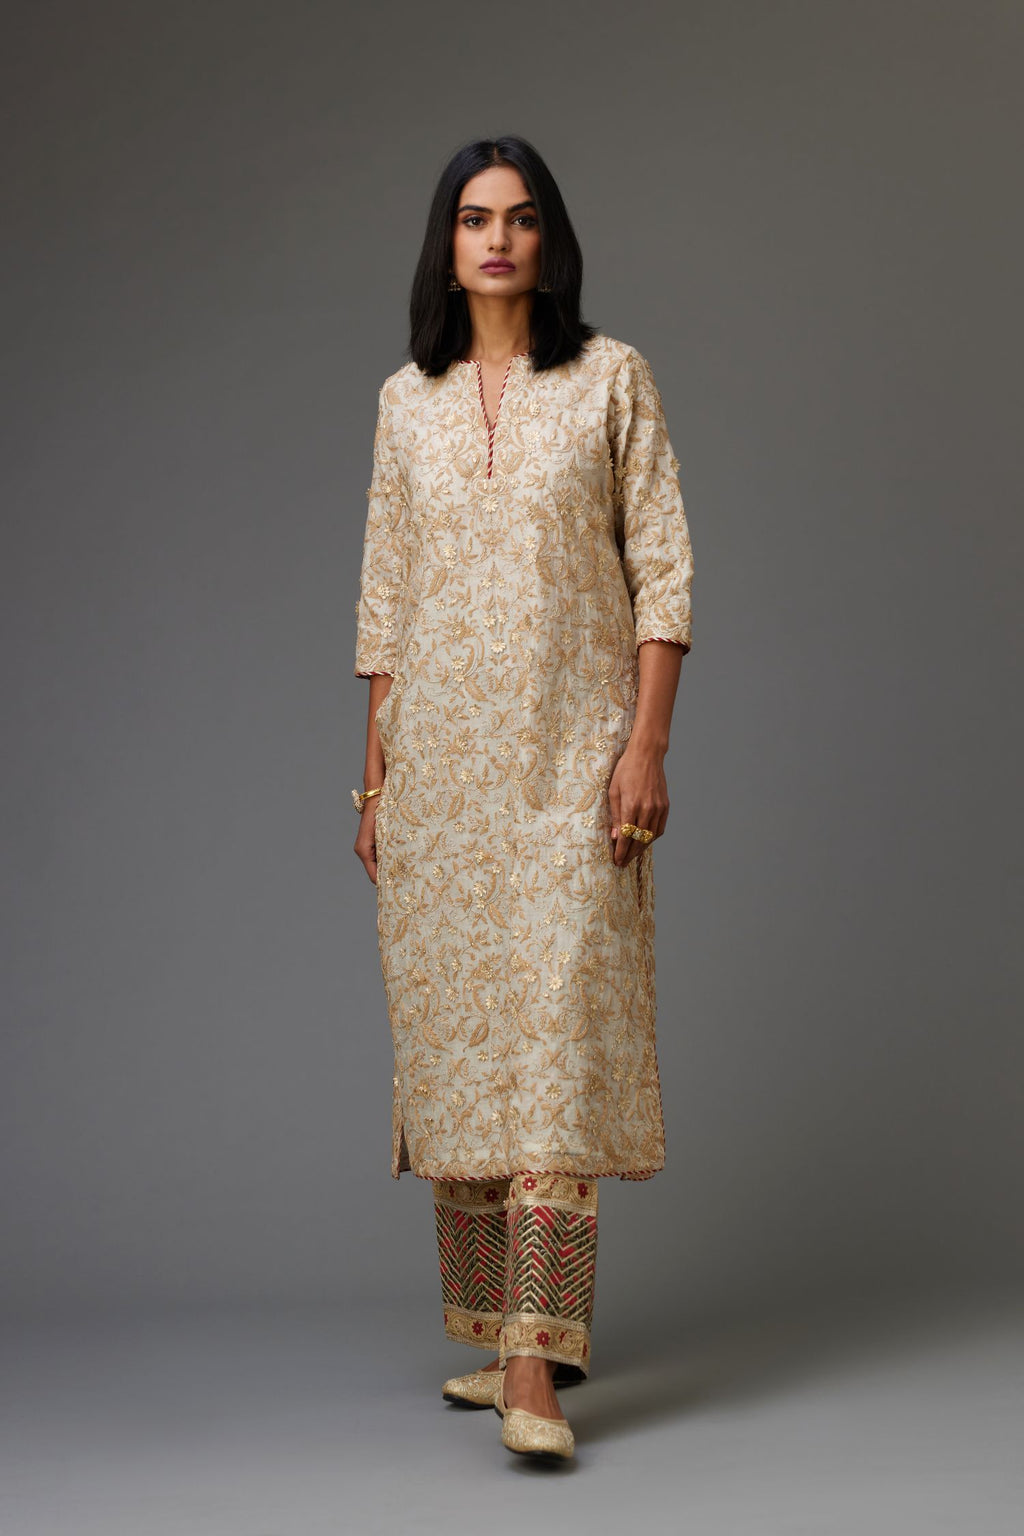 Off white cotton chanderi straight kurta set with all-over dori and gota jaal embroidery, highlighted with gold sequin work.